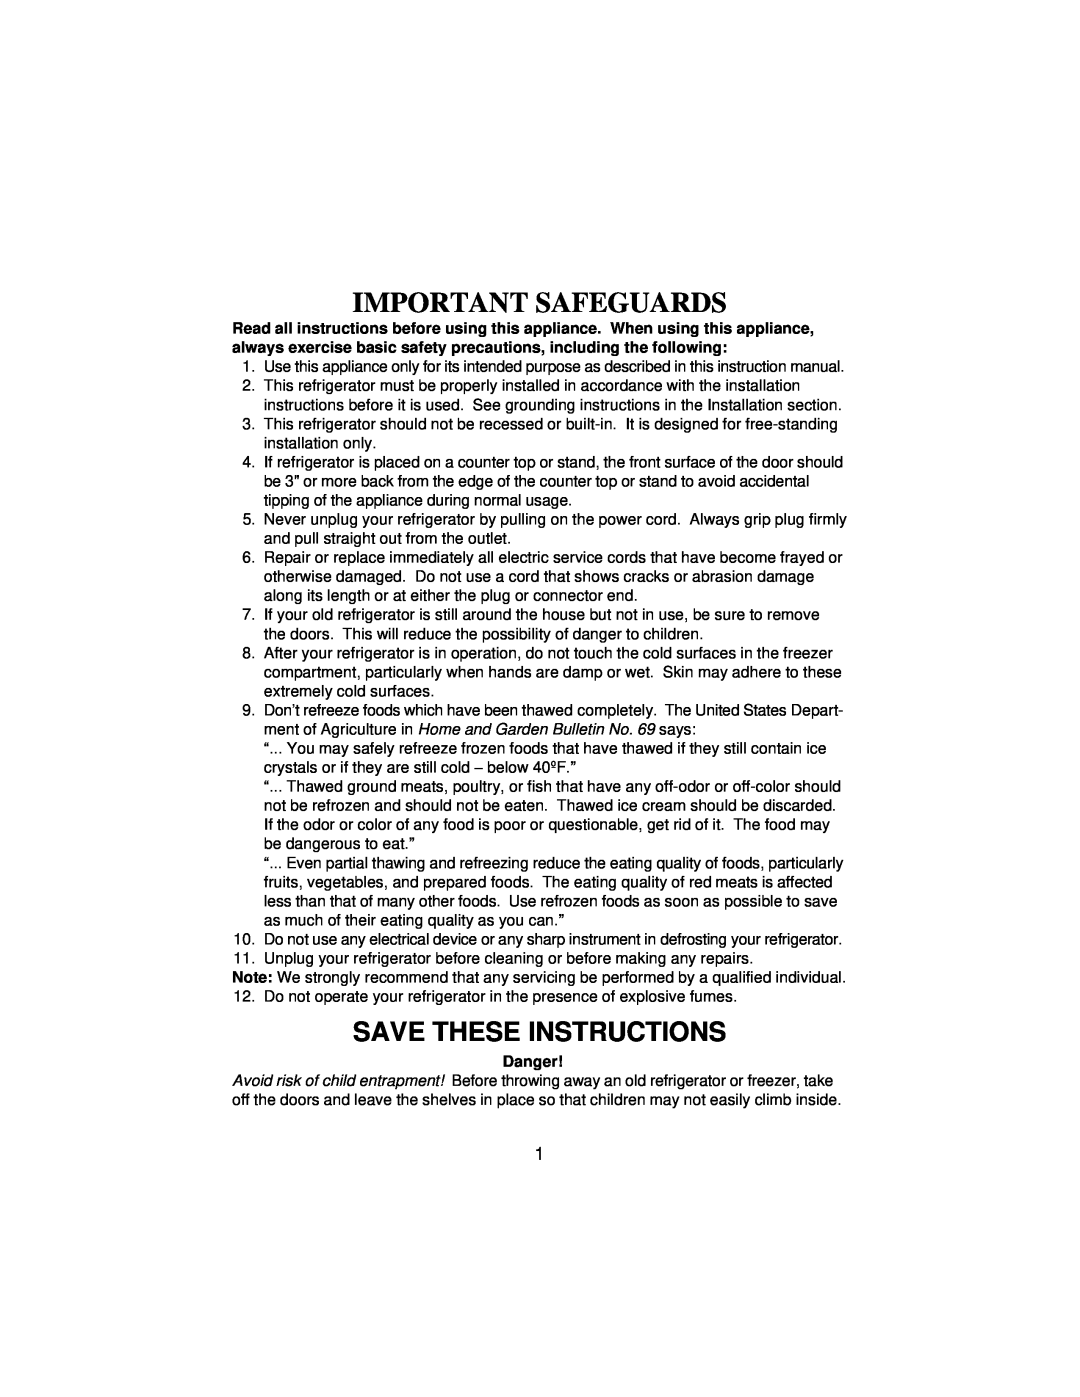 Franklin Industries, L.L.C FCD-400 manual Important Safeguards, Save These Instructions, Danger 